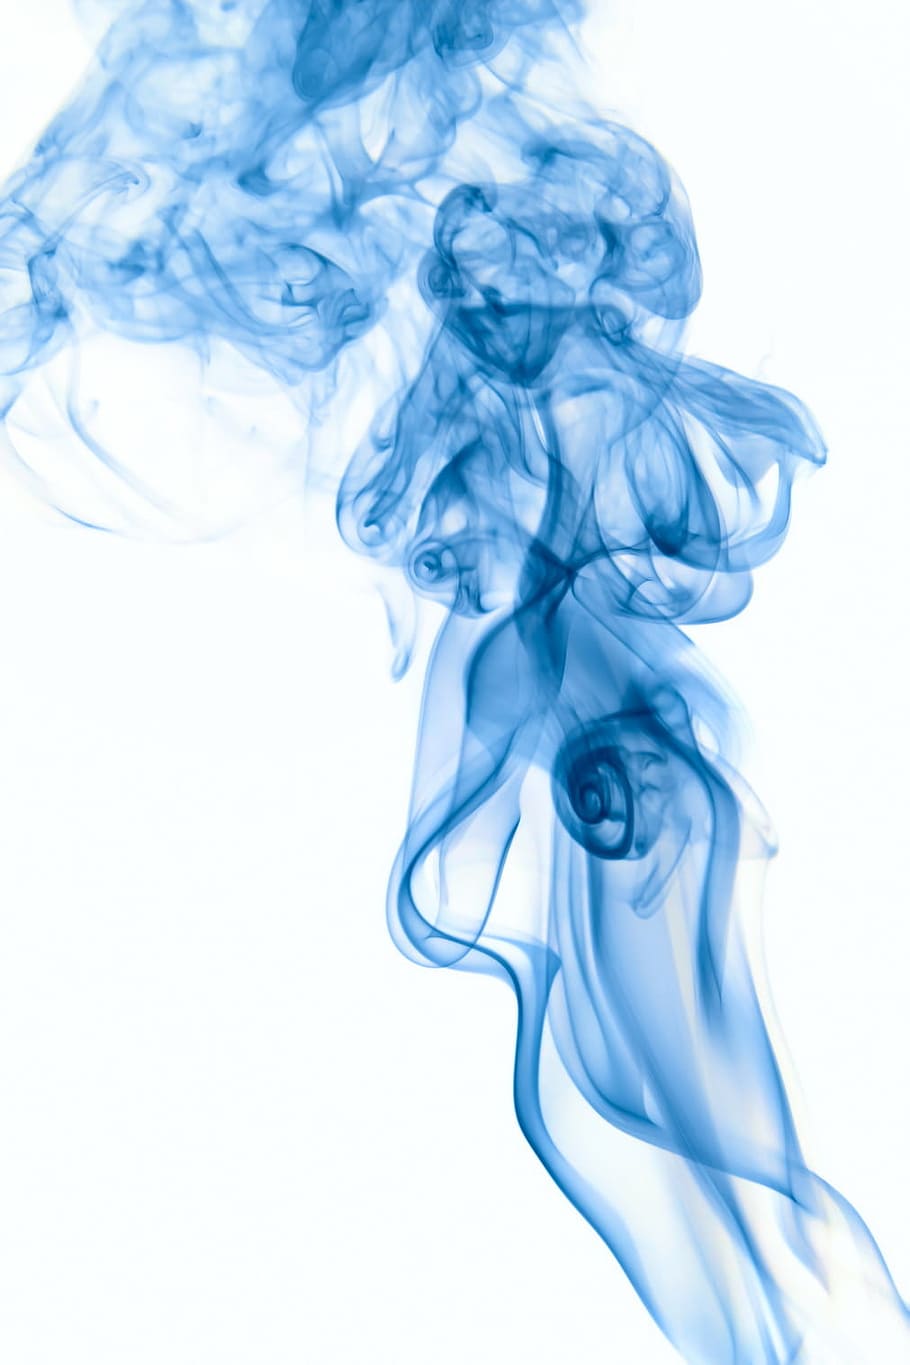 abstract, air, aroma, art, backdrop, background, blue, burning, color, concept